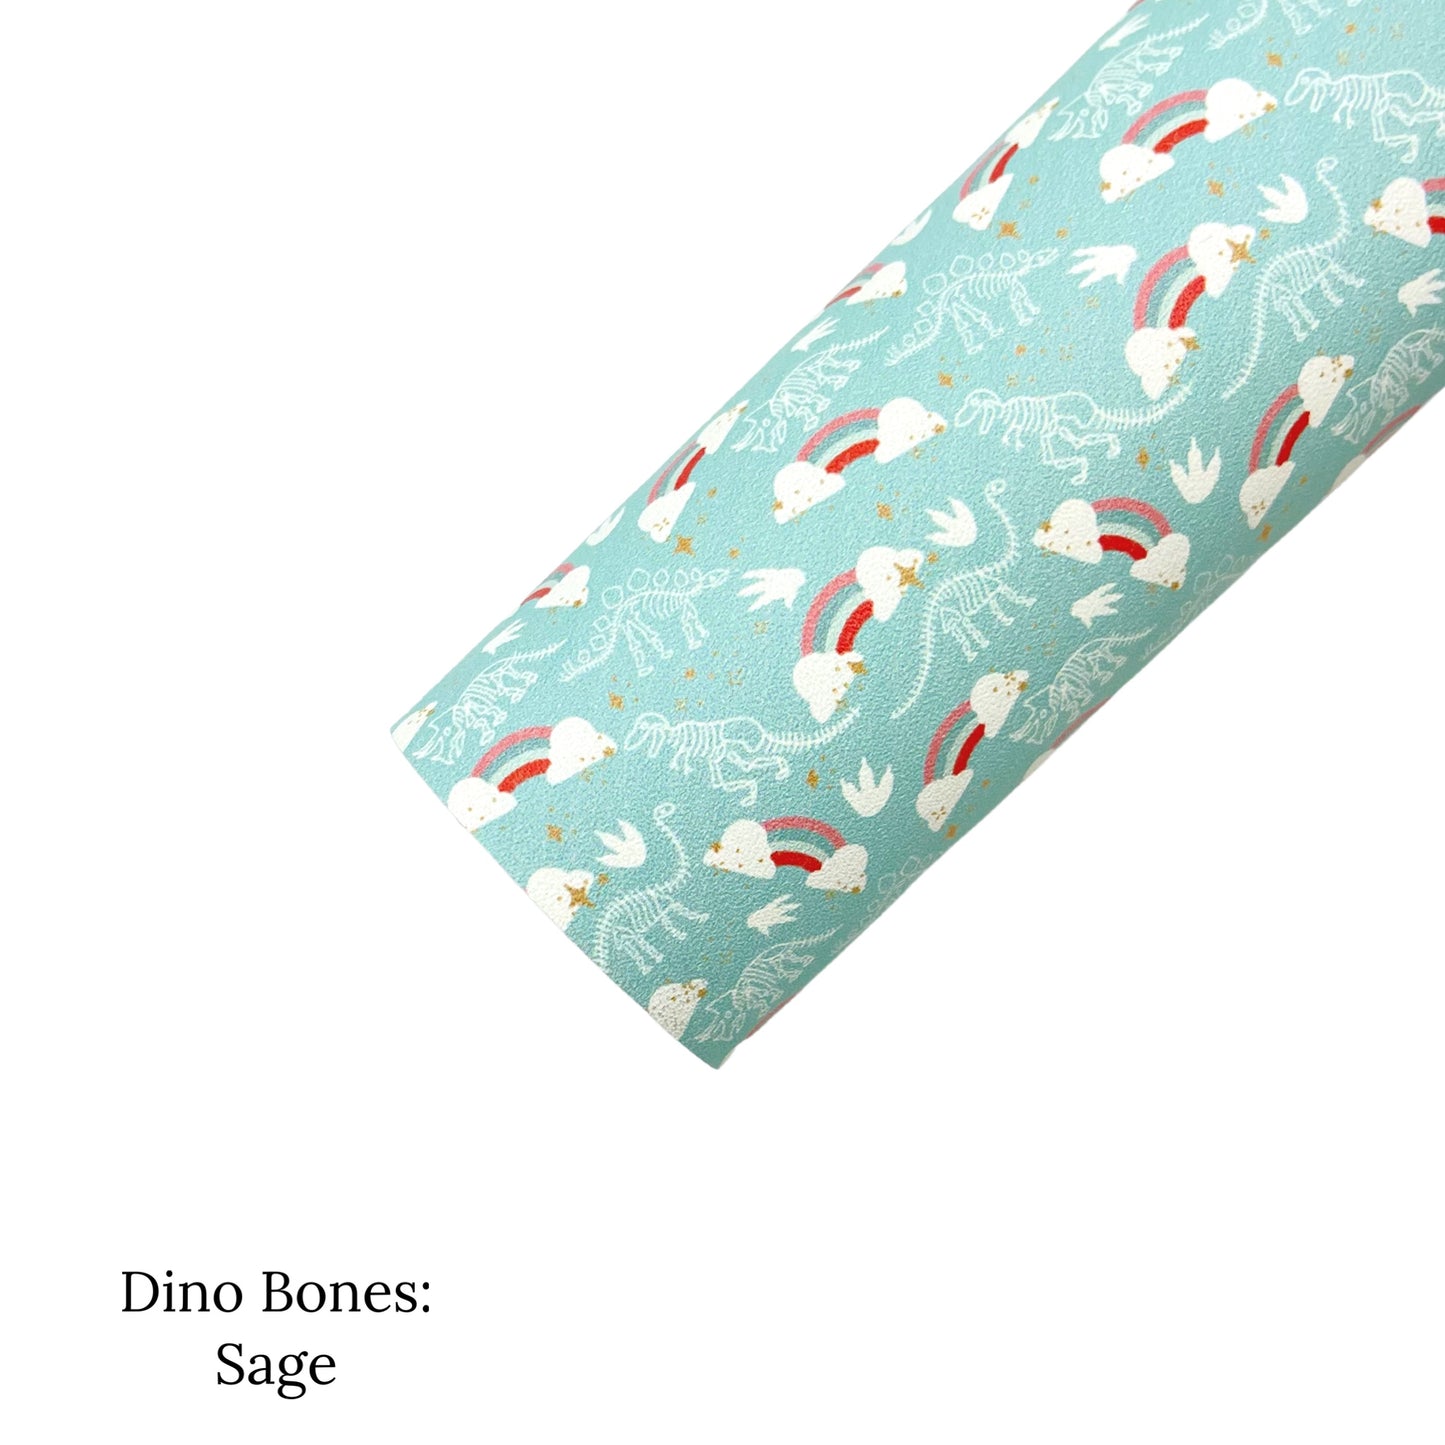 Rolled light aqua faux leather sheet with white dinosaur bones, claw prints, gold stars, and retro rainbow pattern.